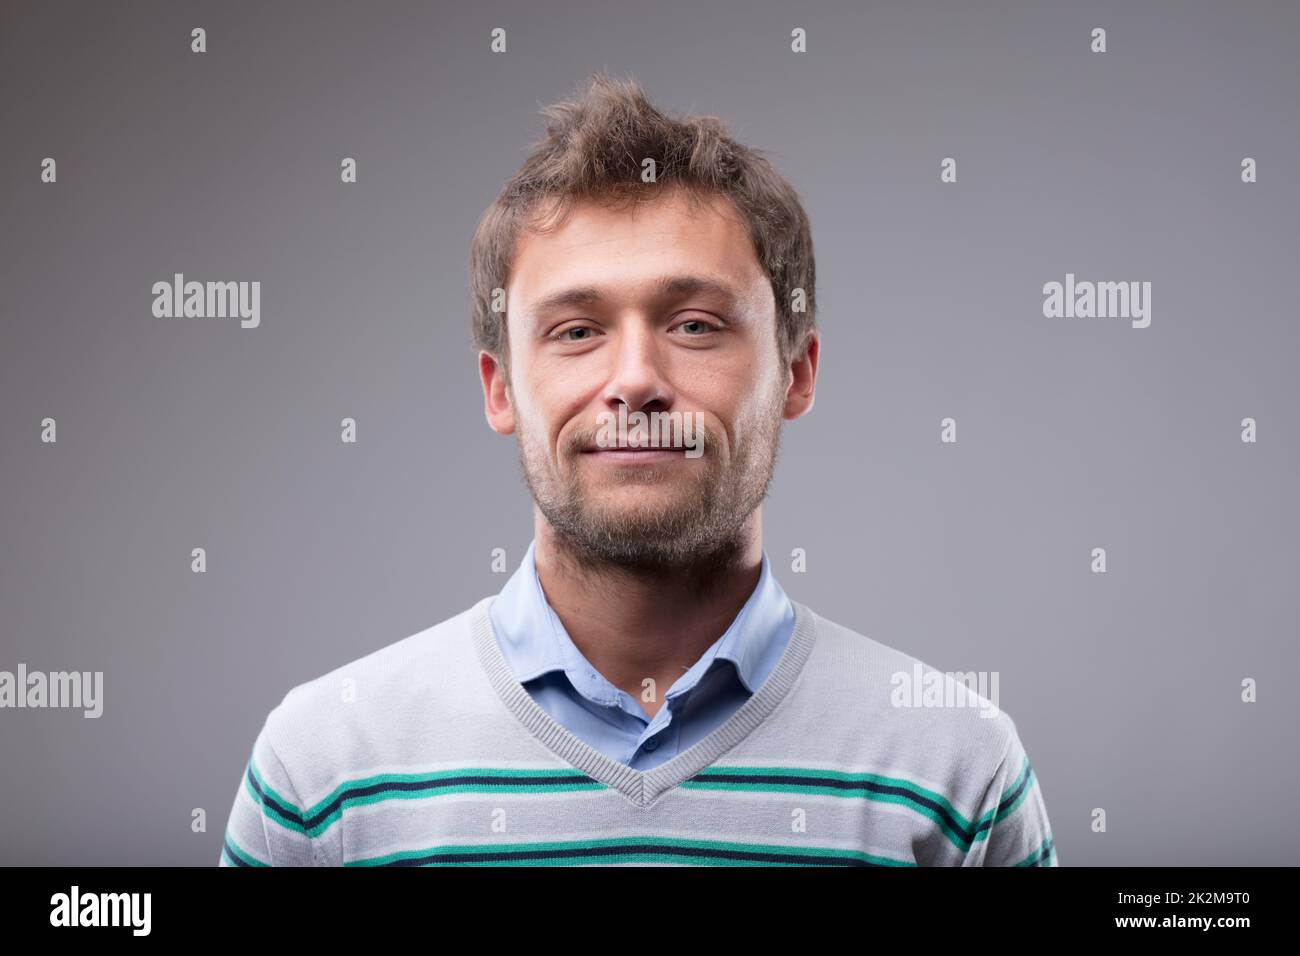 Friendly man with a lovely warm smile Stock Photo